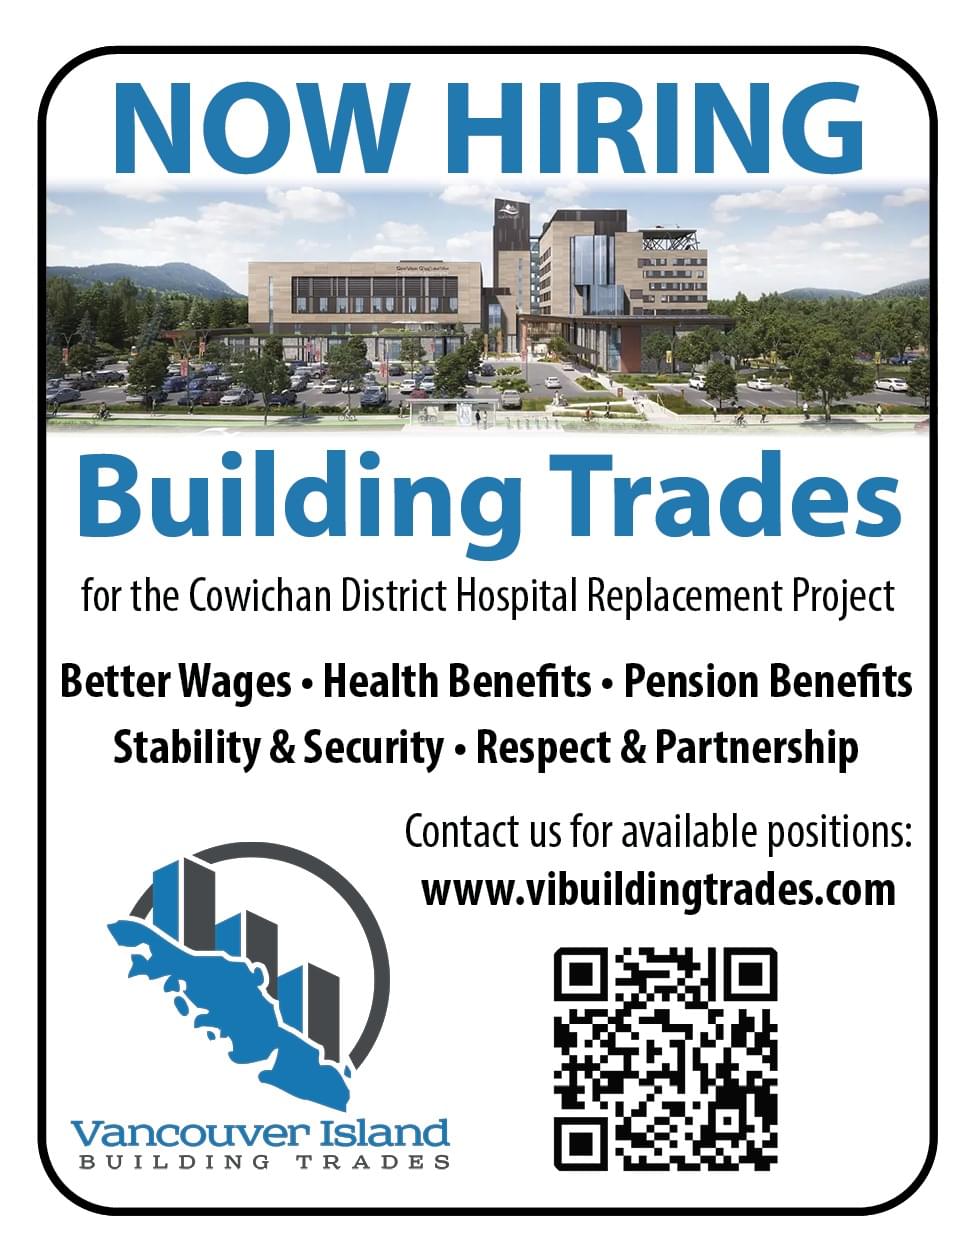 Vancouver Island Building Trades Now Hiring Duncan BCAd in Coffee News